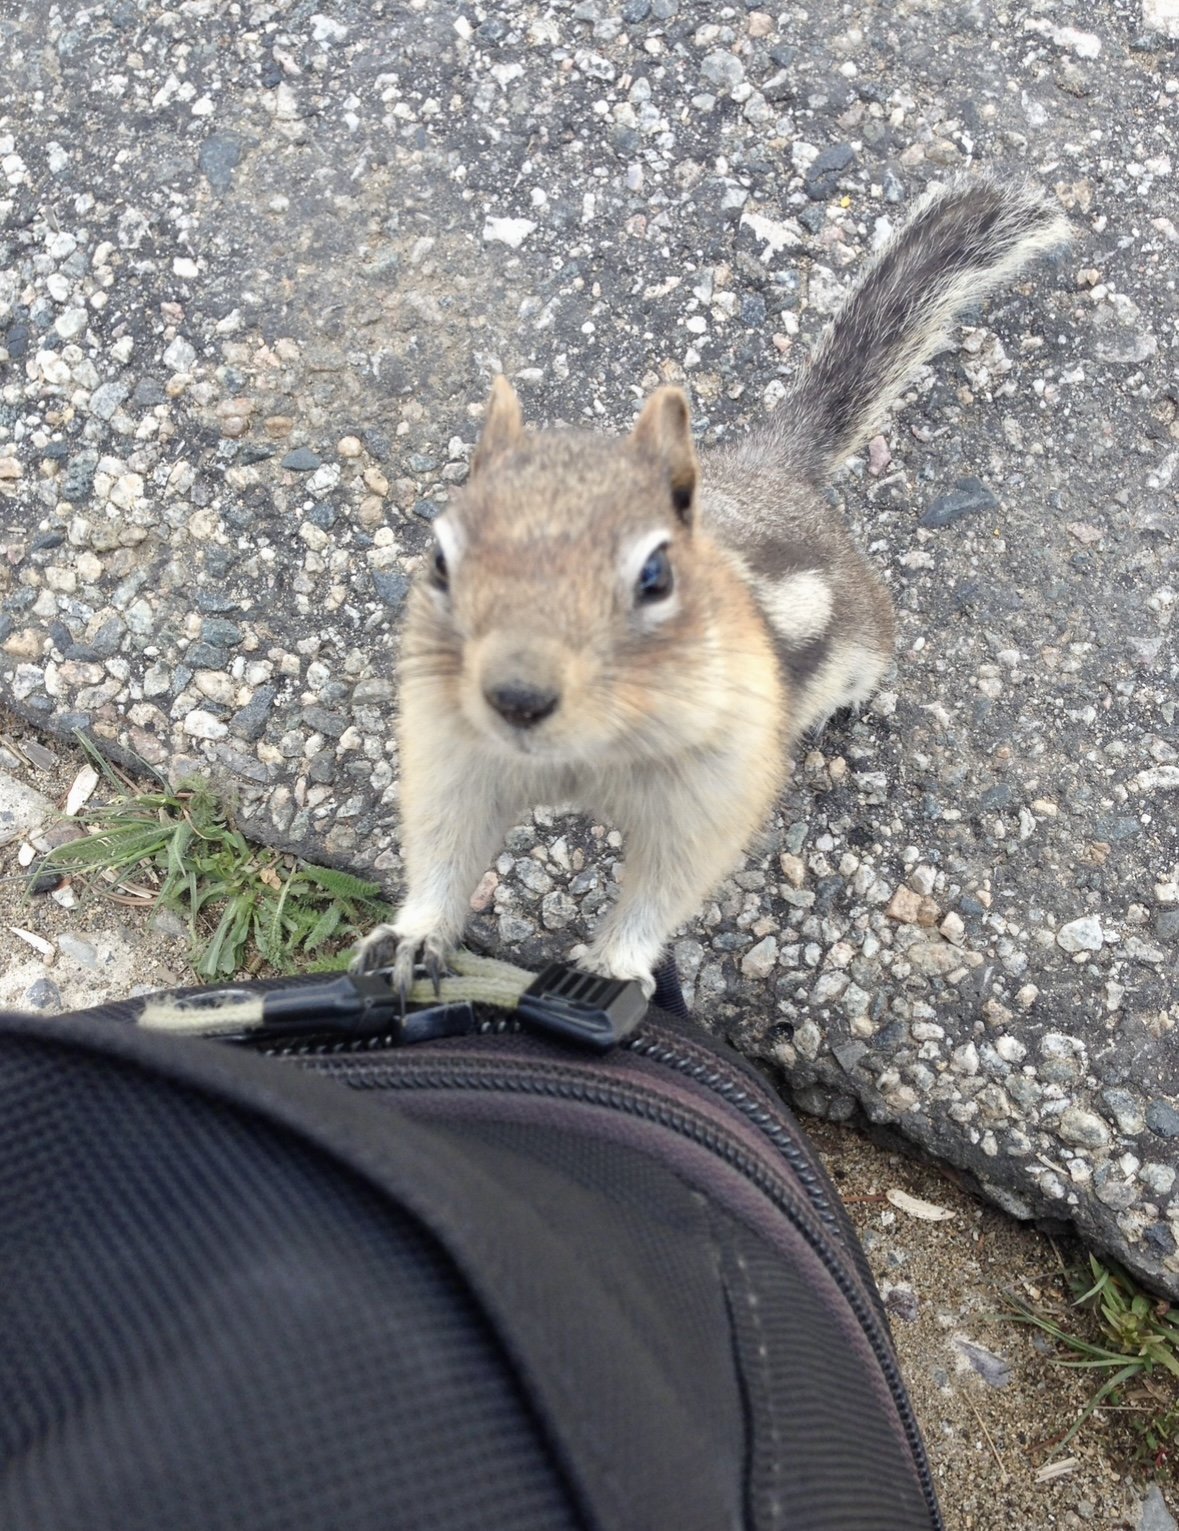  Lots of little chipmunks were begging at the overlook on Beartooth Pass as you look down over Red Lodge, Montana. This one is trying to get into my tank bag for some snacks. 